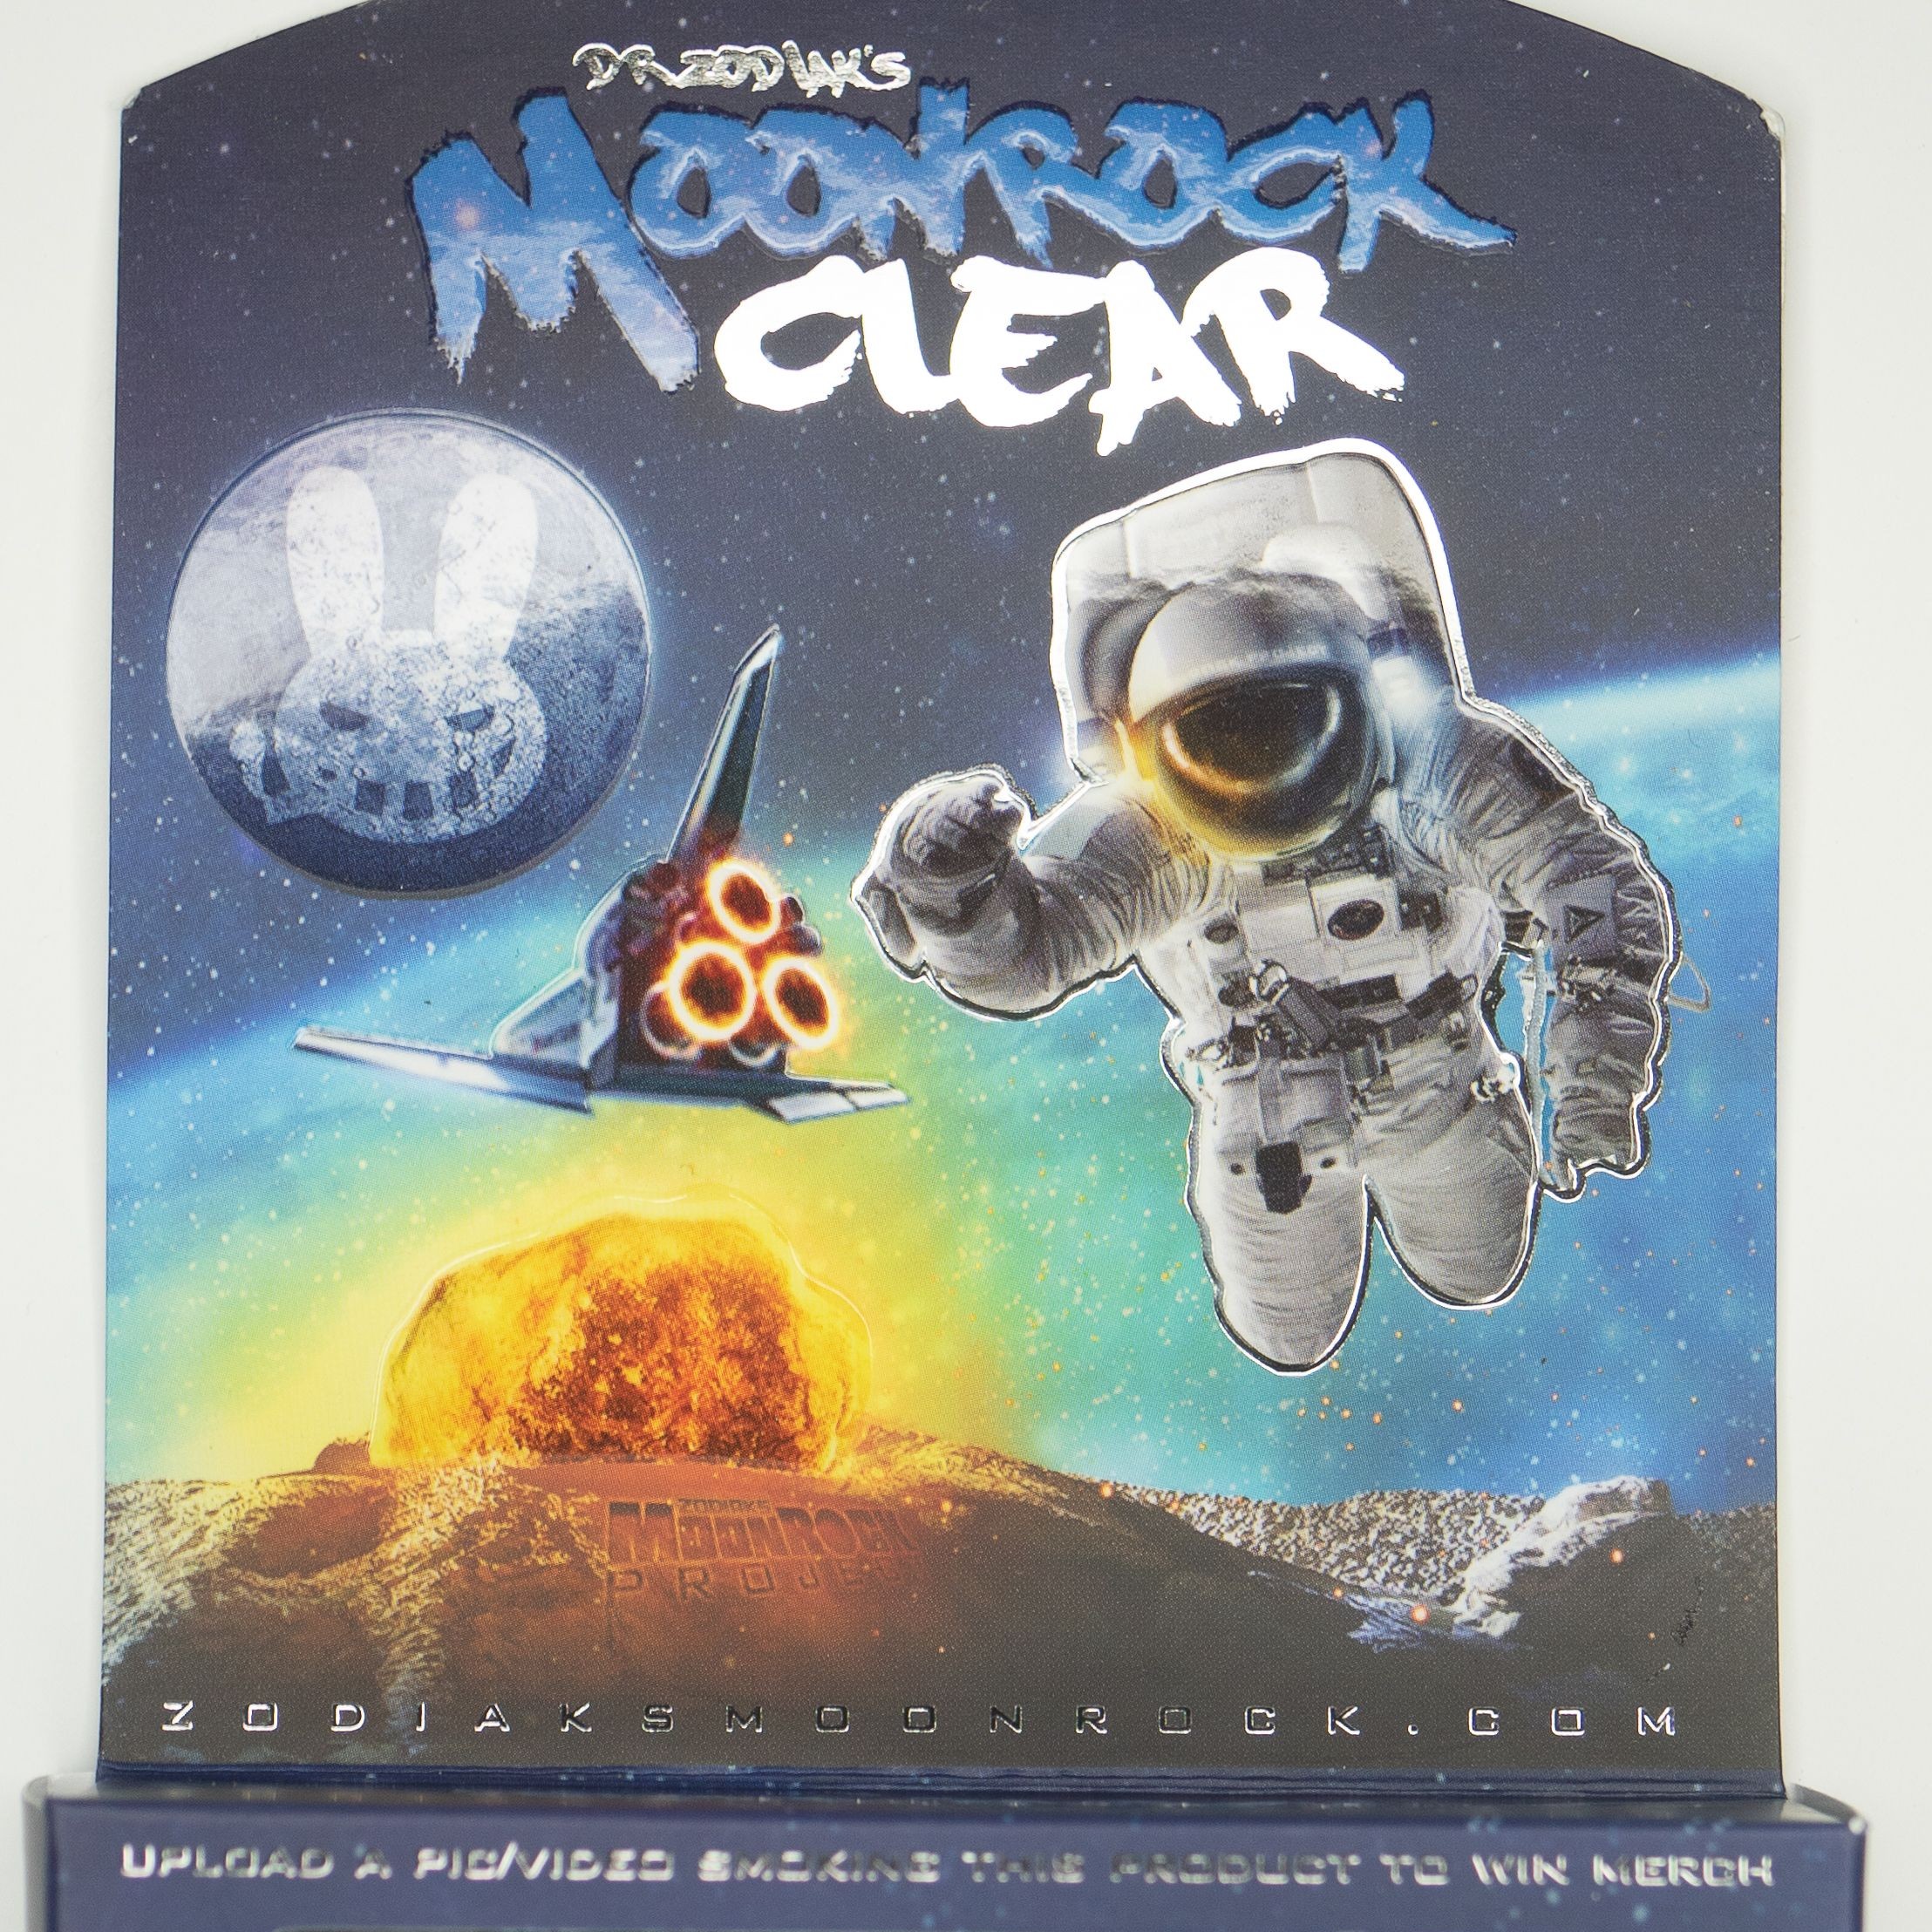 Our Products – Dr.Zodiak's Moonrock